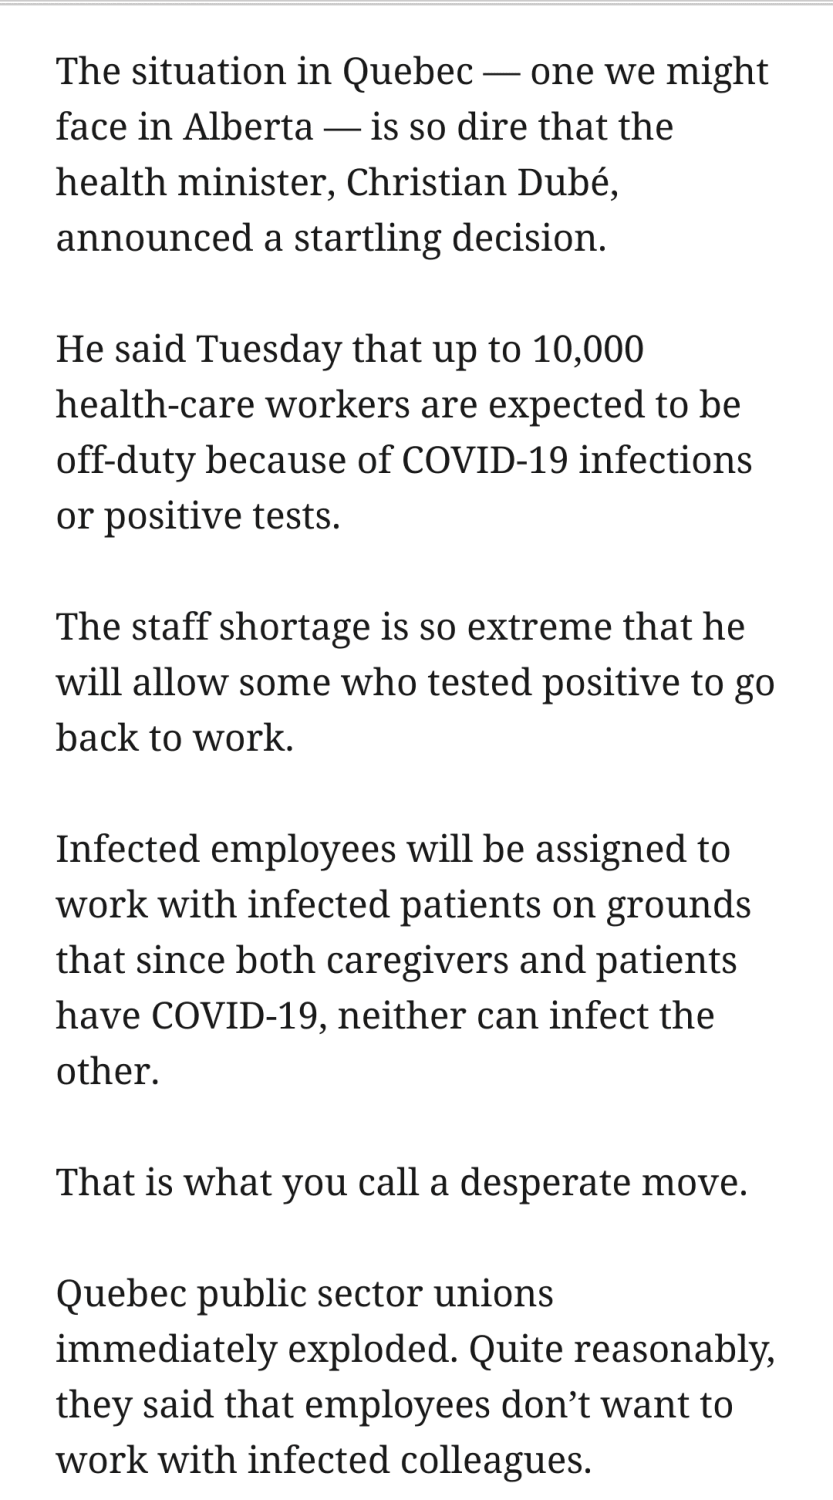 "You've got Omicron so it won't matter if you assist the infected." - Canadian Government to Healthcare Workers